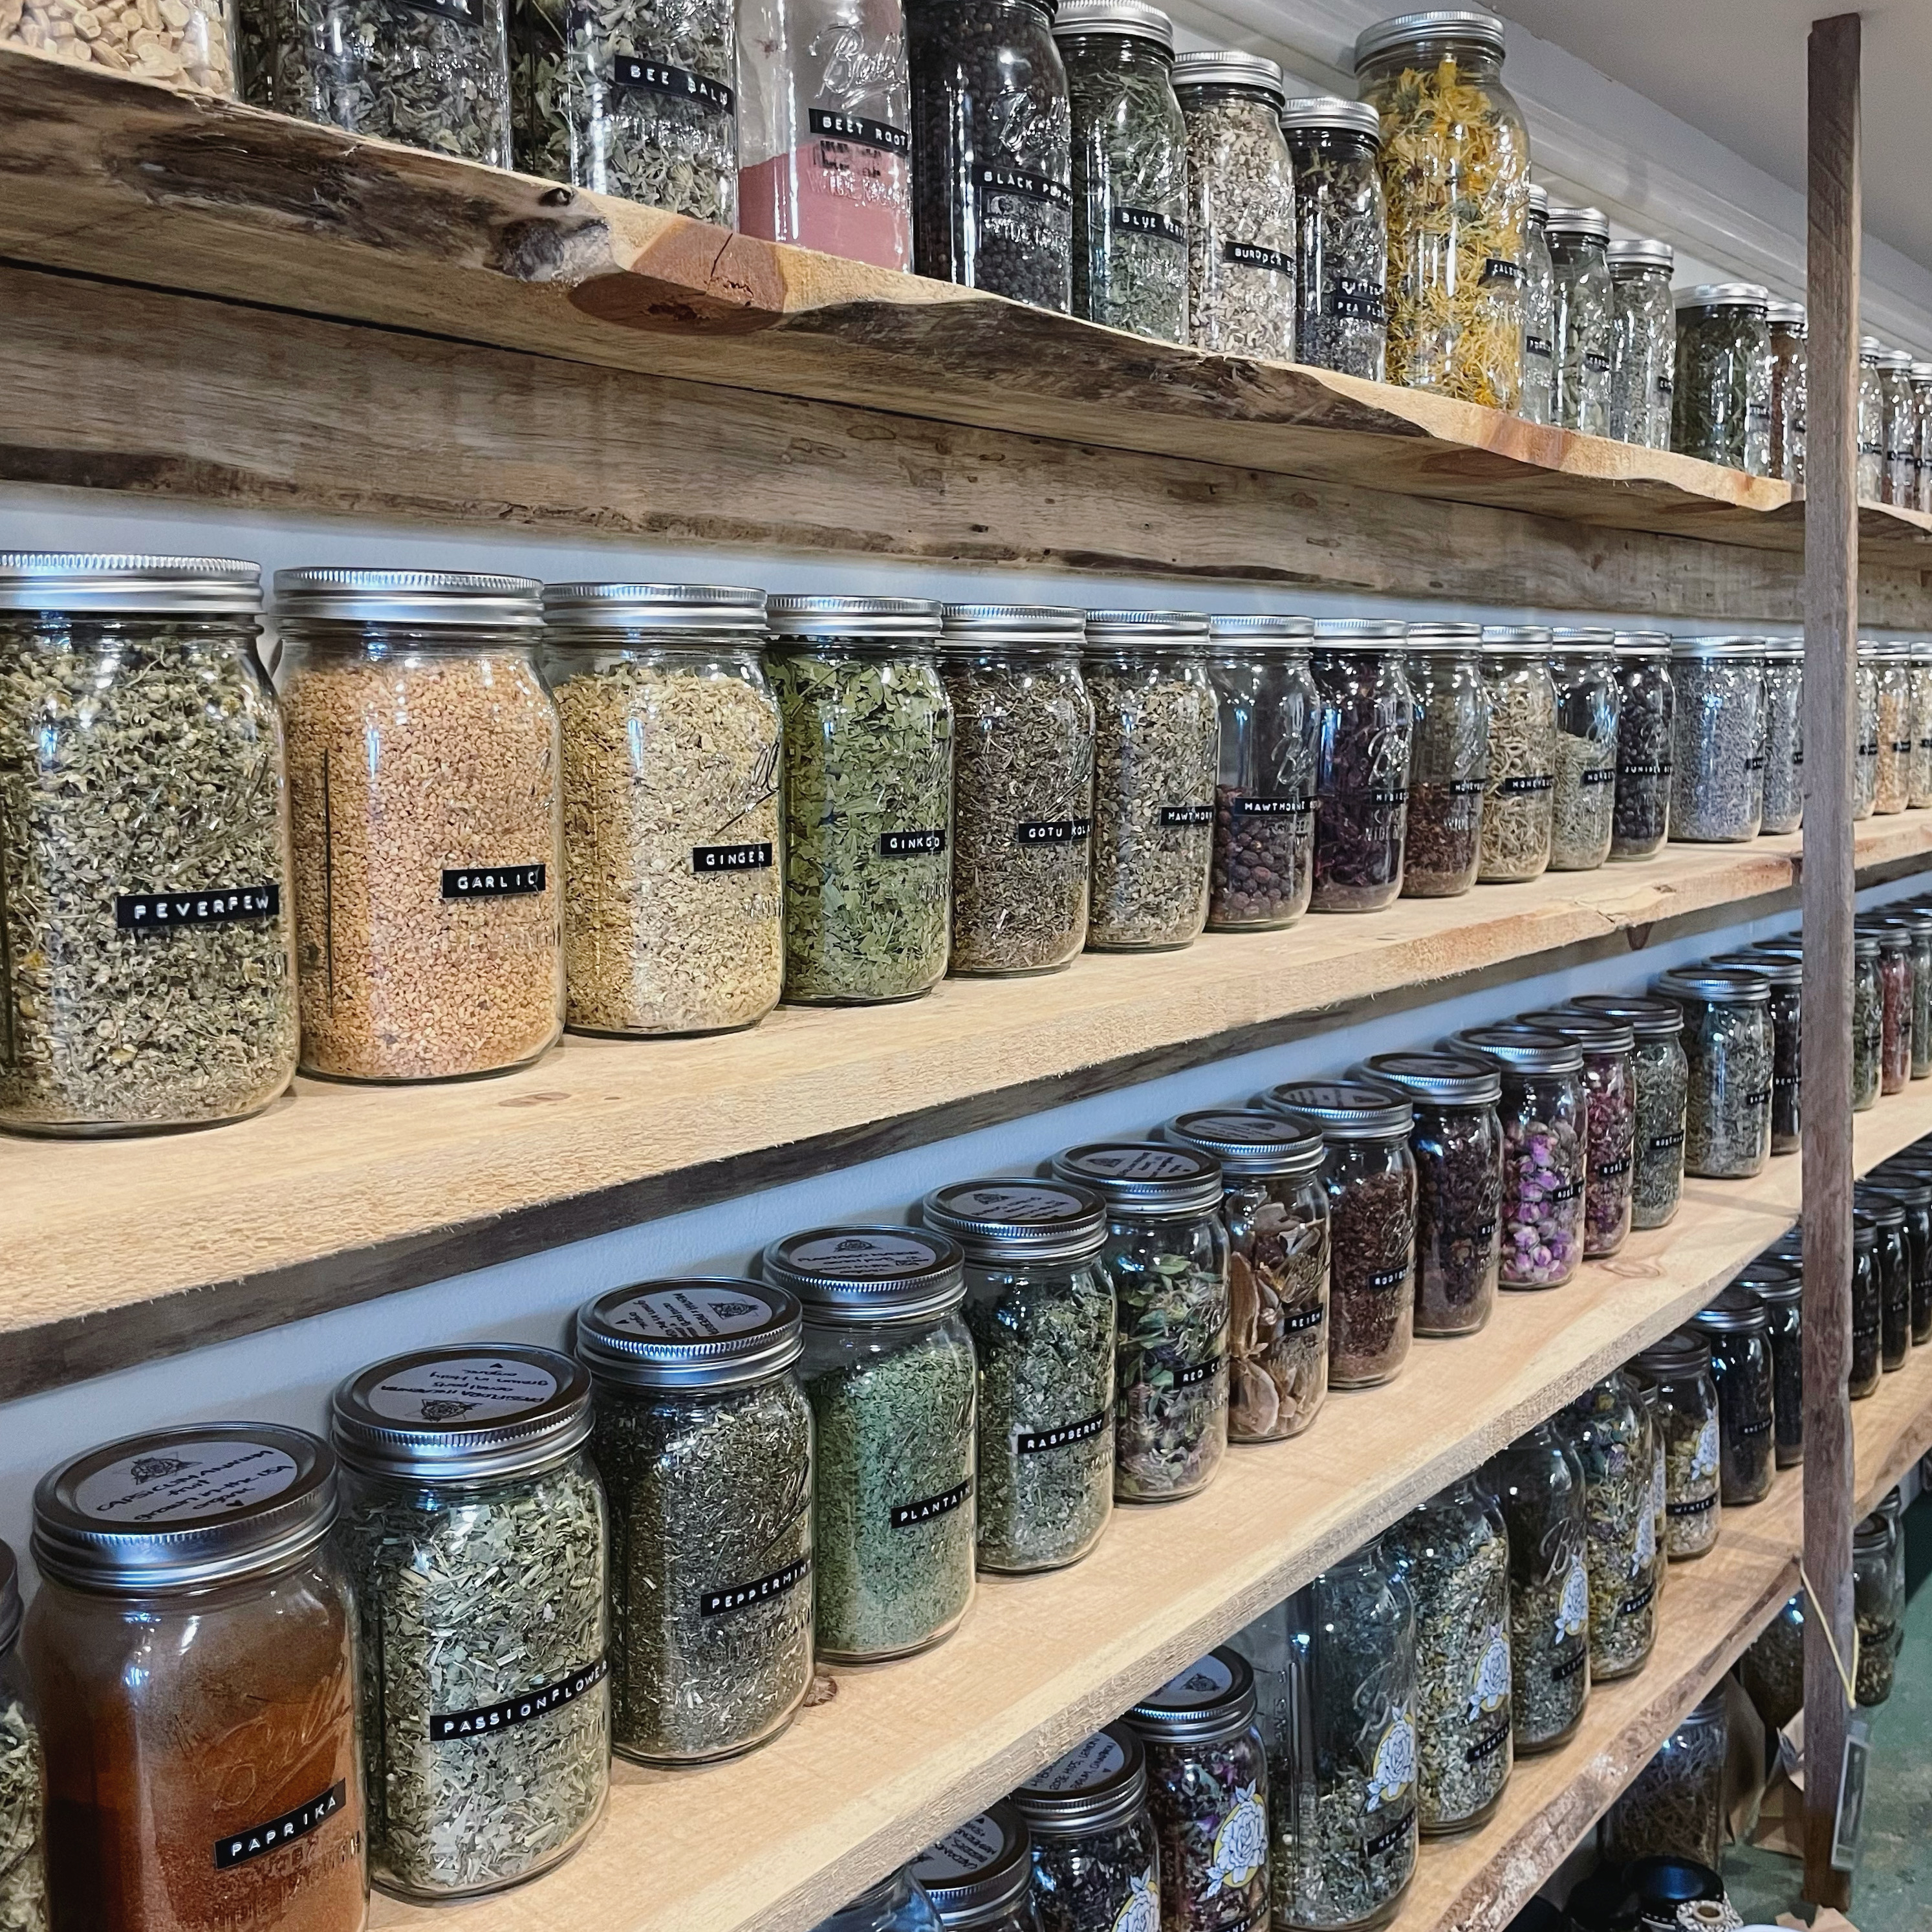 Colorful dried herbs and spices in mason jars on shelves made of reclaimed wood. Herbs are in alphabetical order and labeled with small black and white labels.